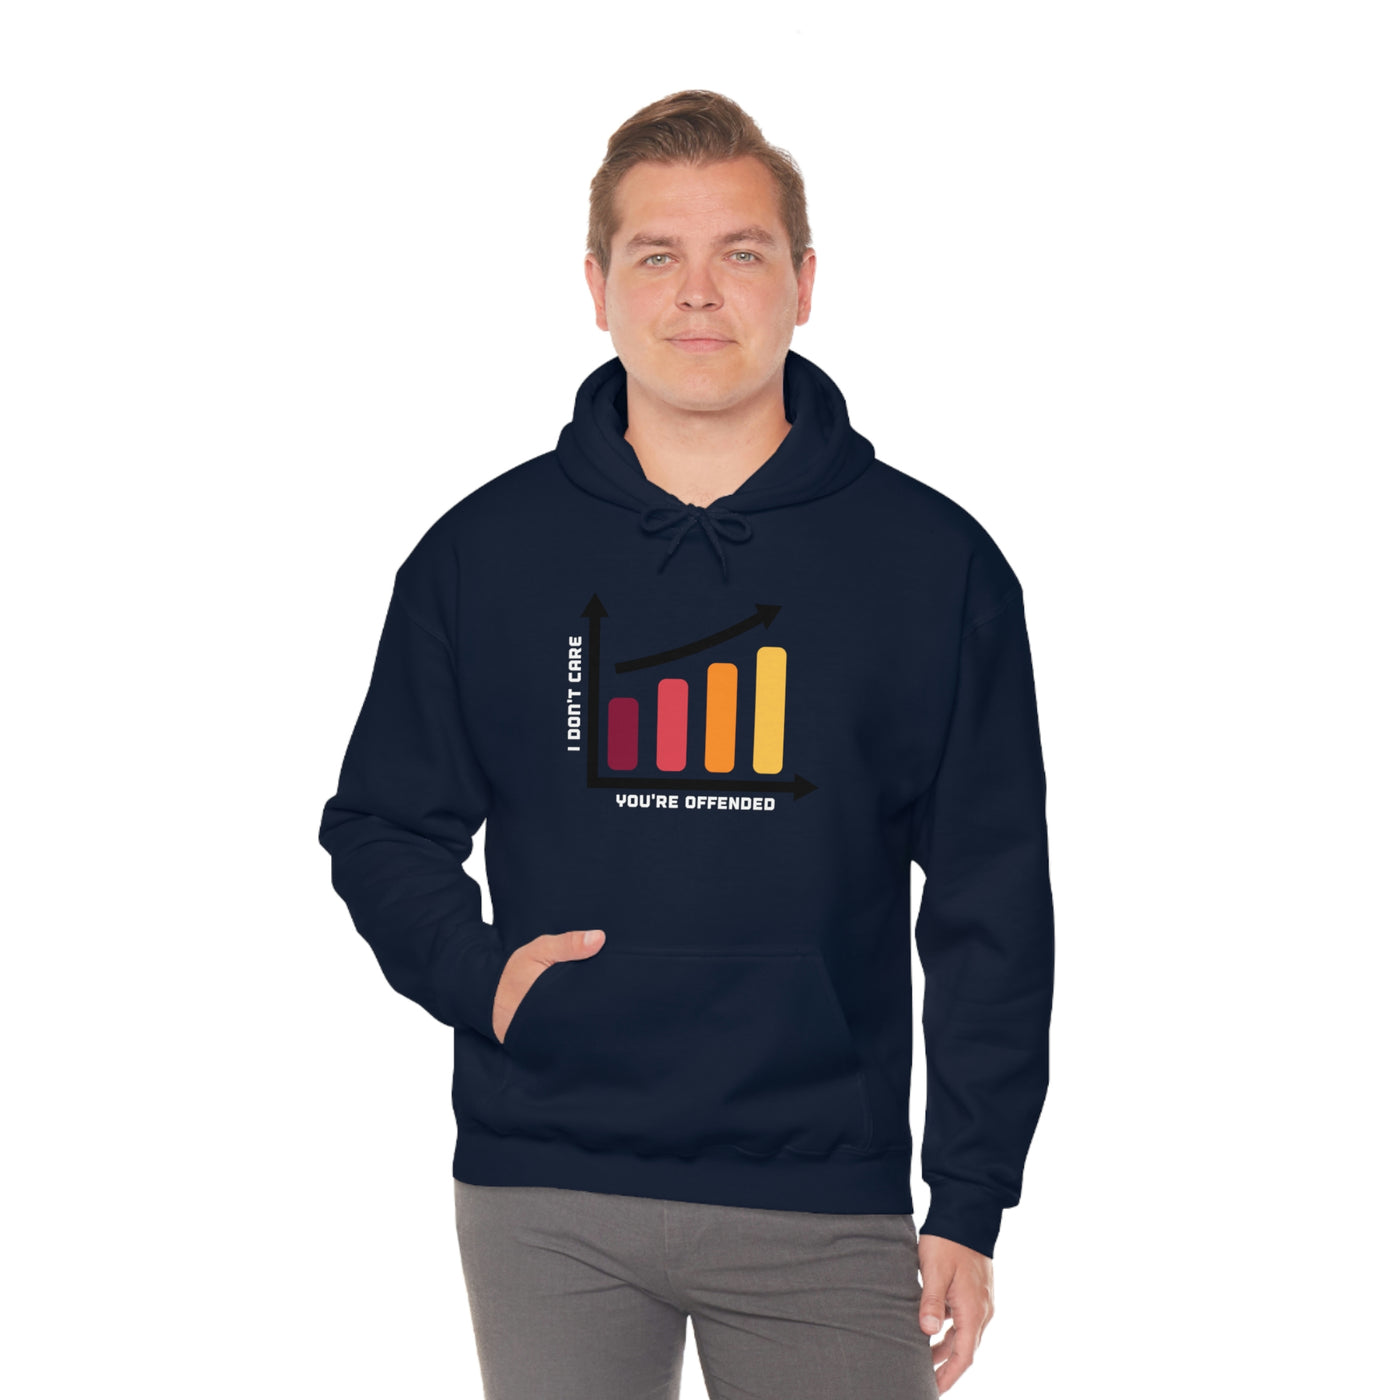 I Don't Care Unisex Hoodie